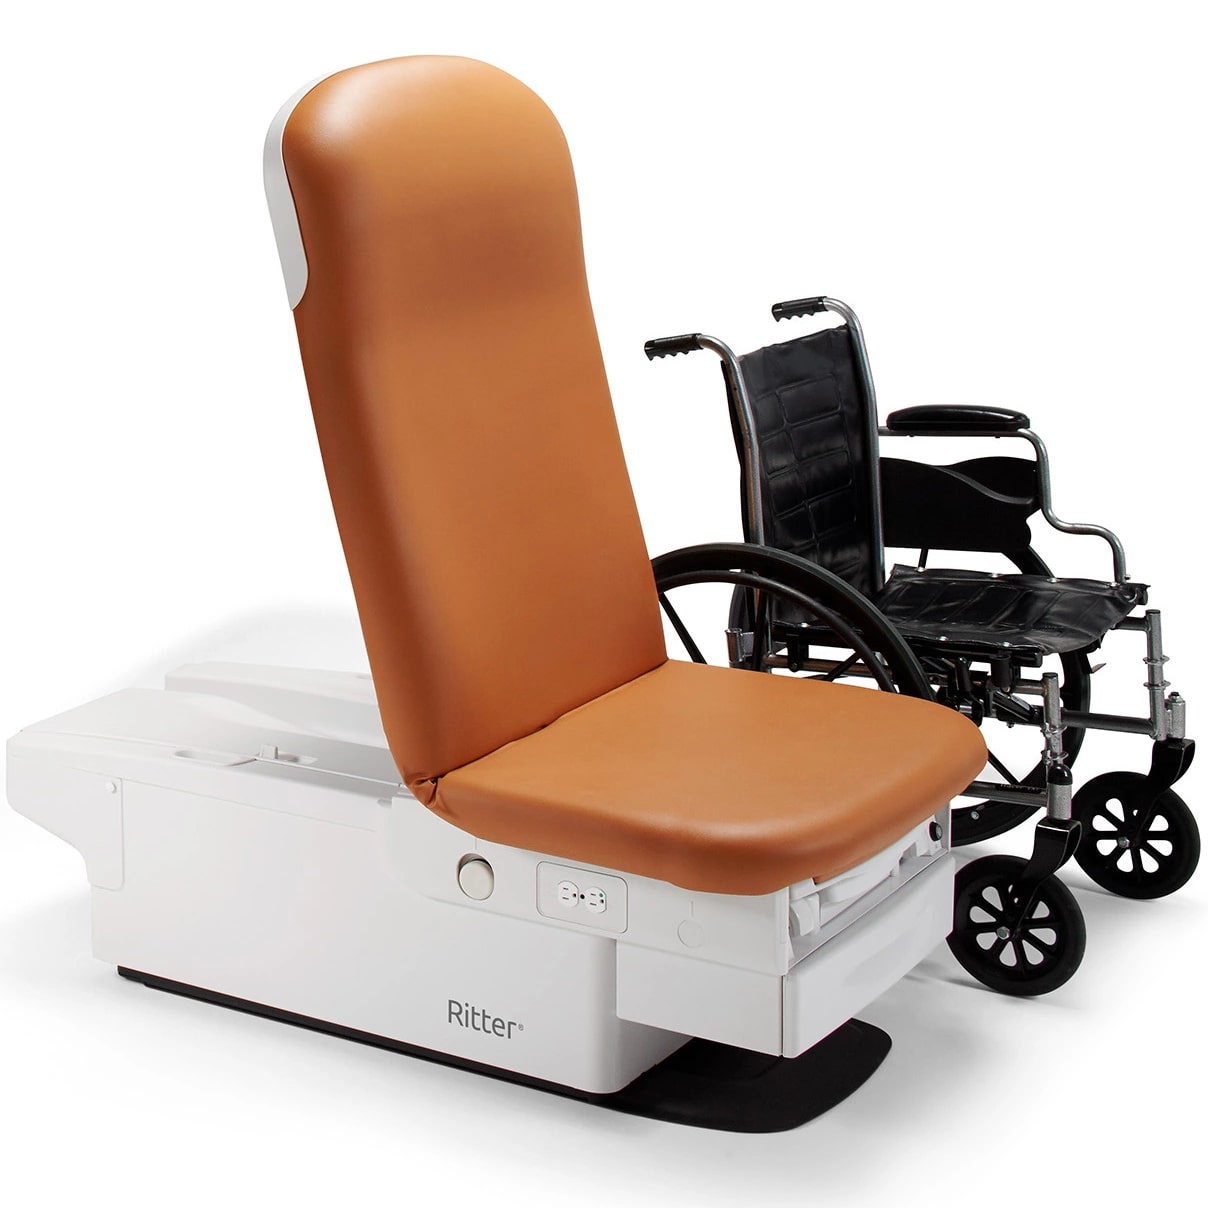 Ritter 225 Barrier-Free Examination Chair